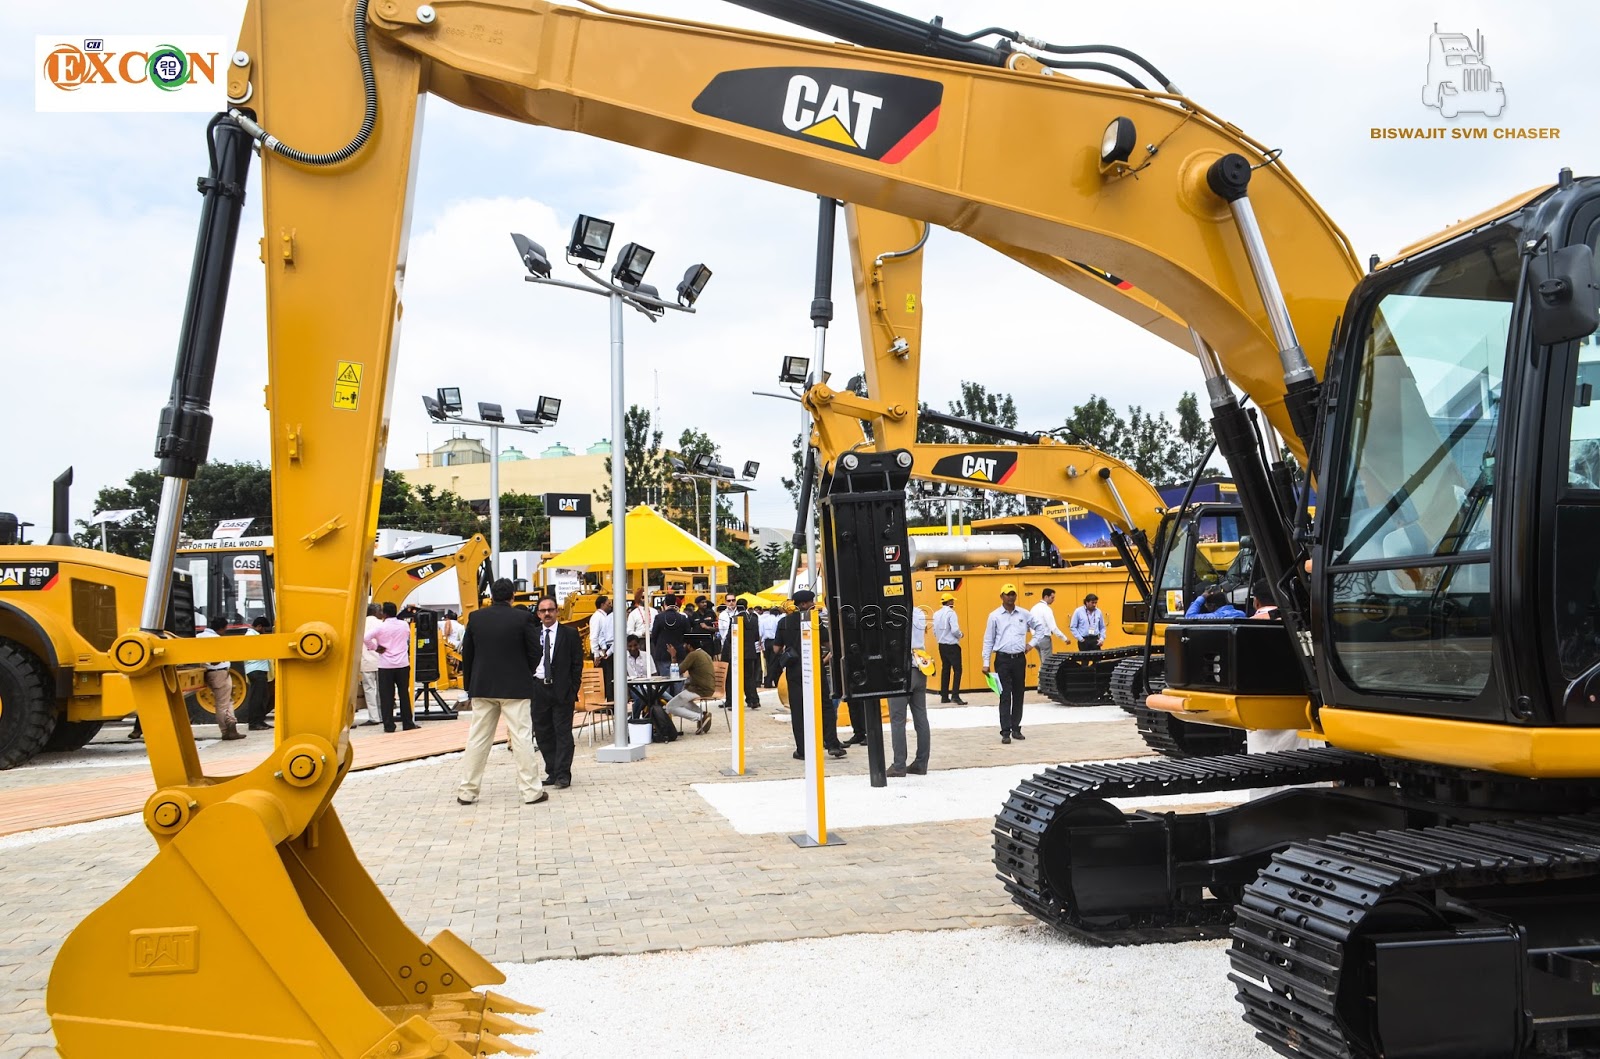 Caterpillar India Private Limited At Excon 2015 Bengaluru Part 4 Biswajit SVM Chaser